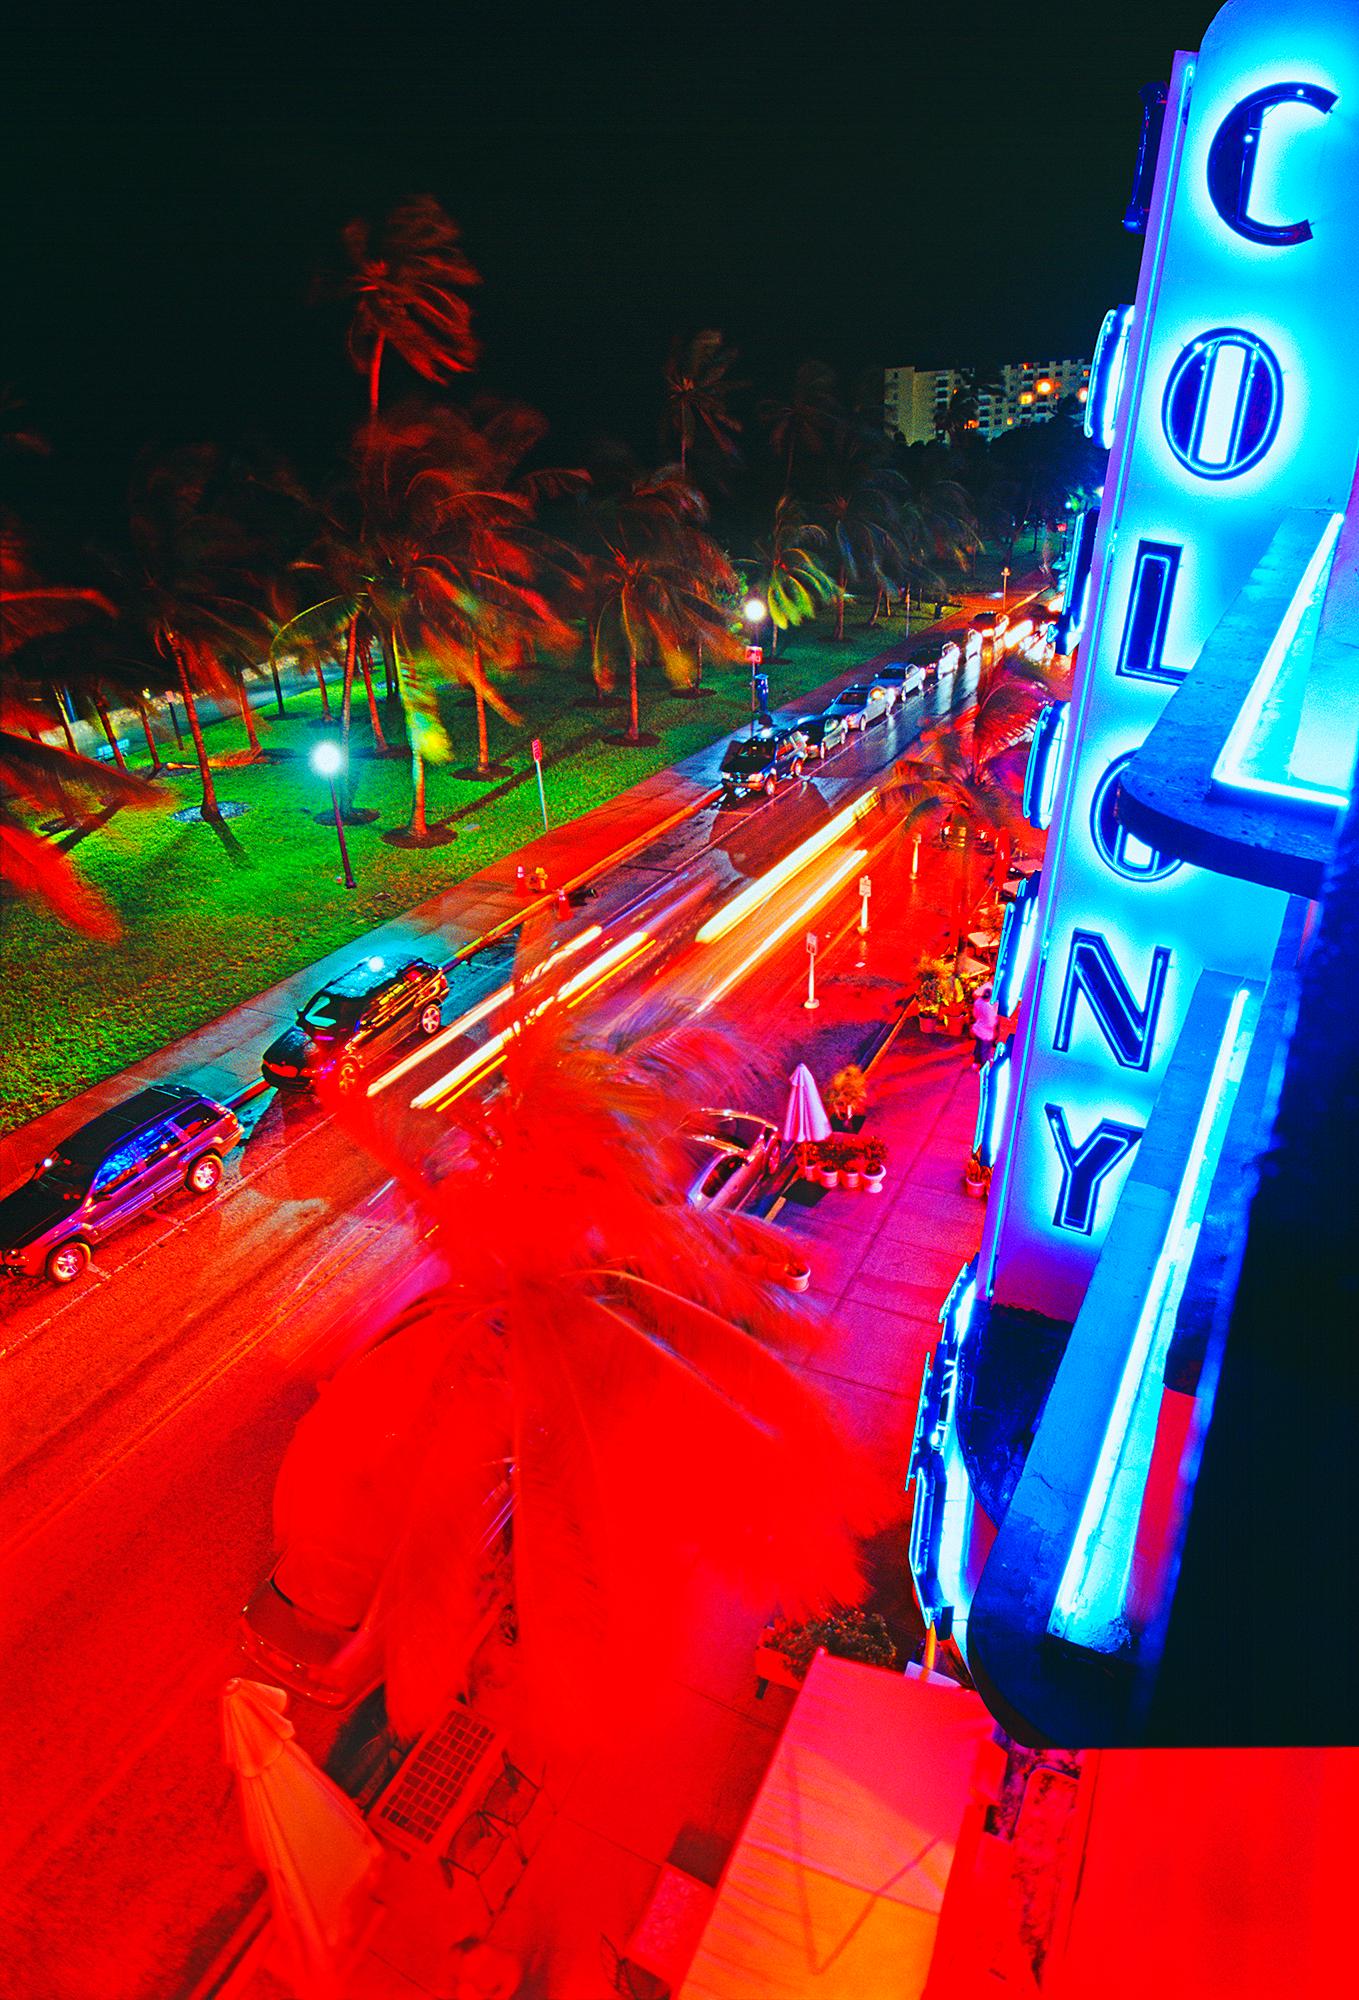 Mitchell Funk Abstract Photograph - High Angle View Of The Colony Hotel On Ocean Drive, Miami Beach